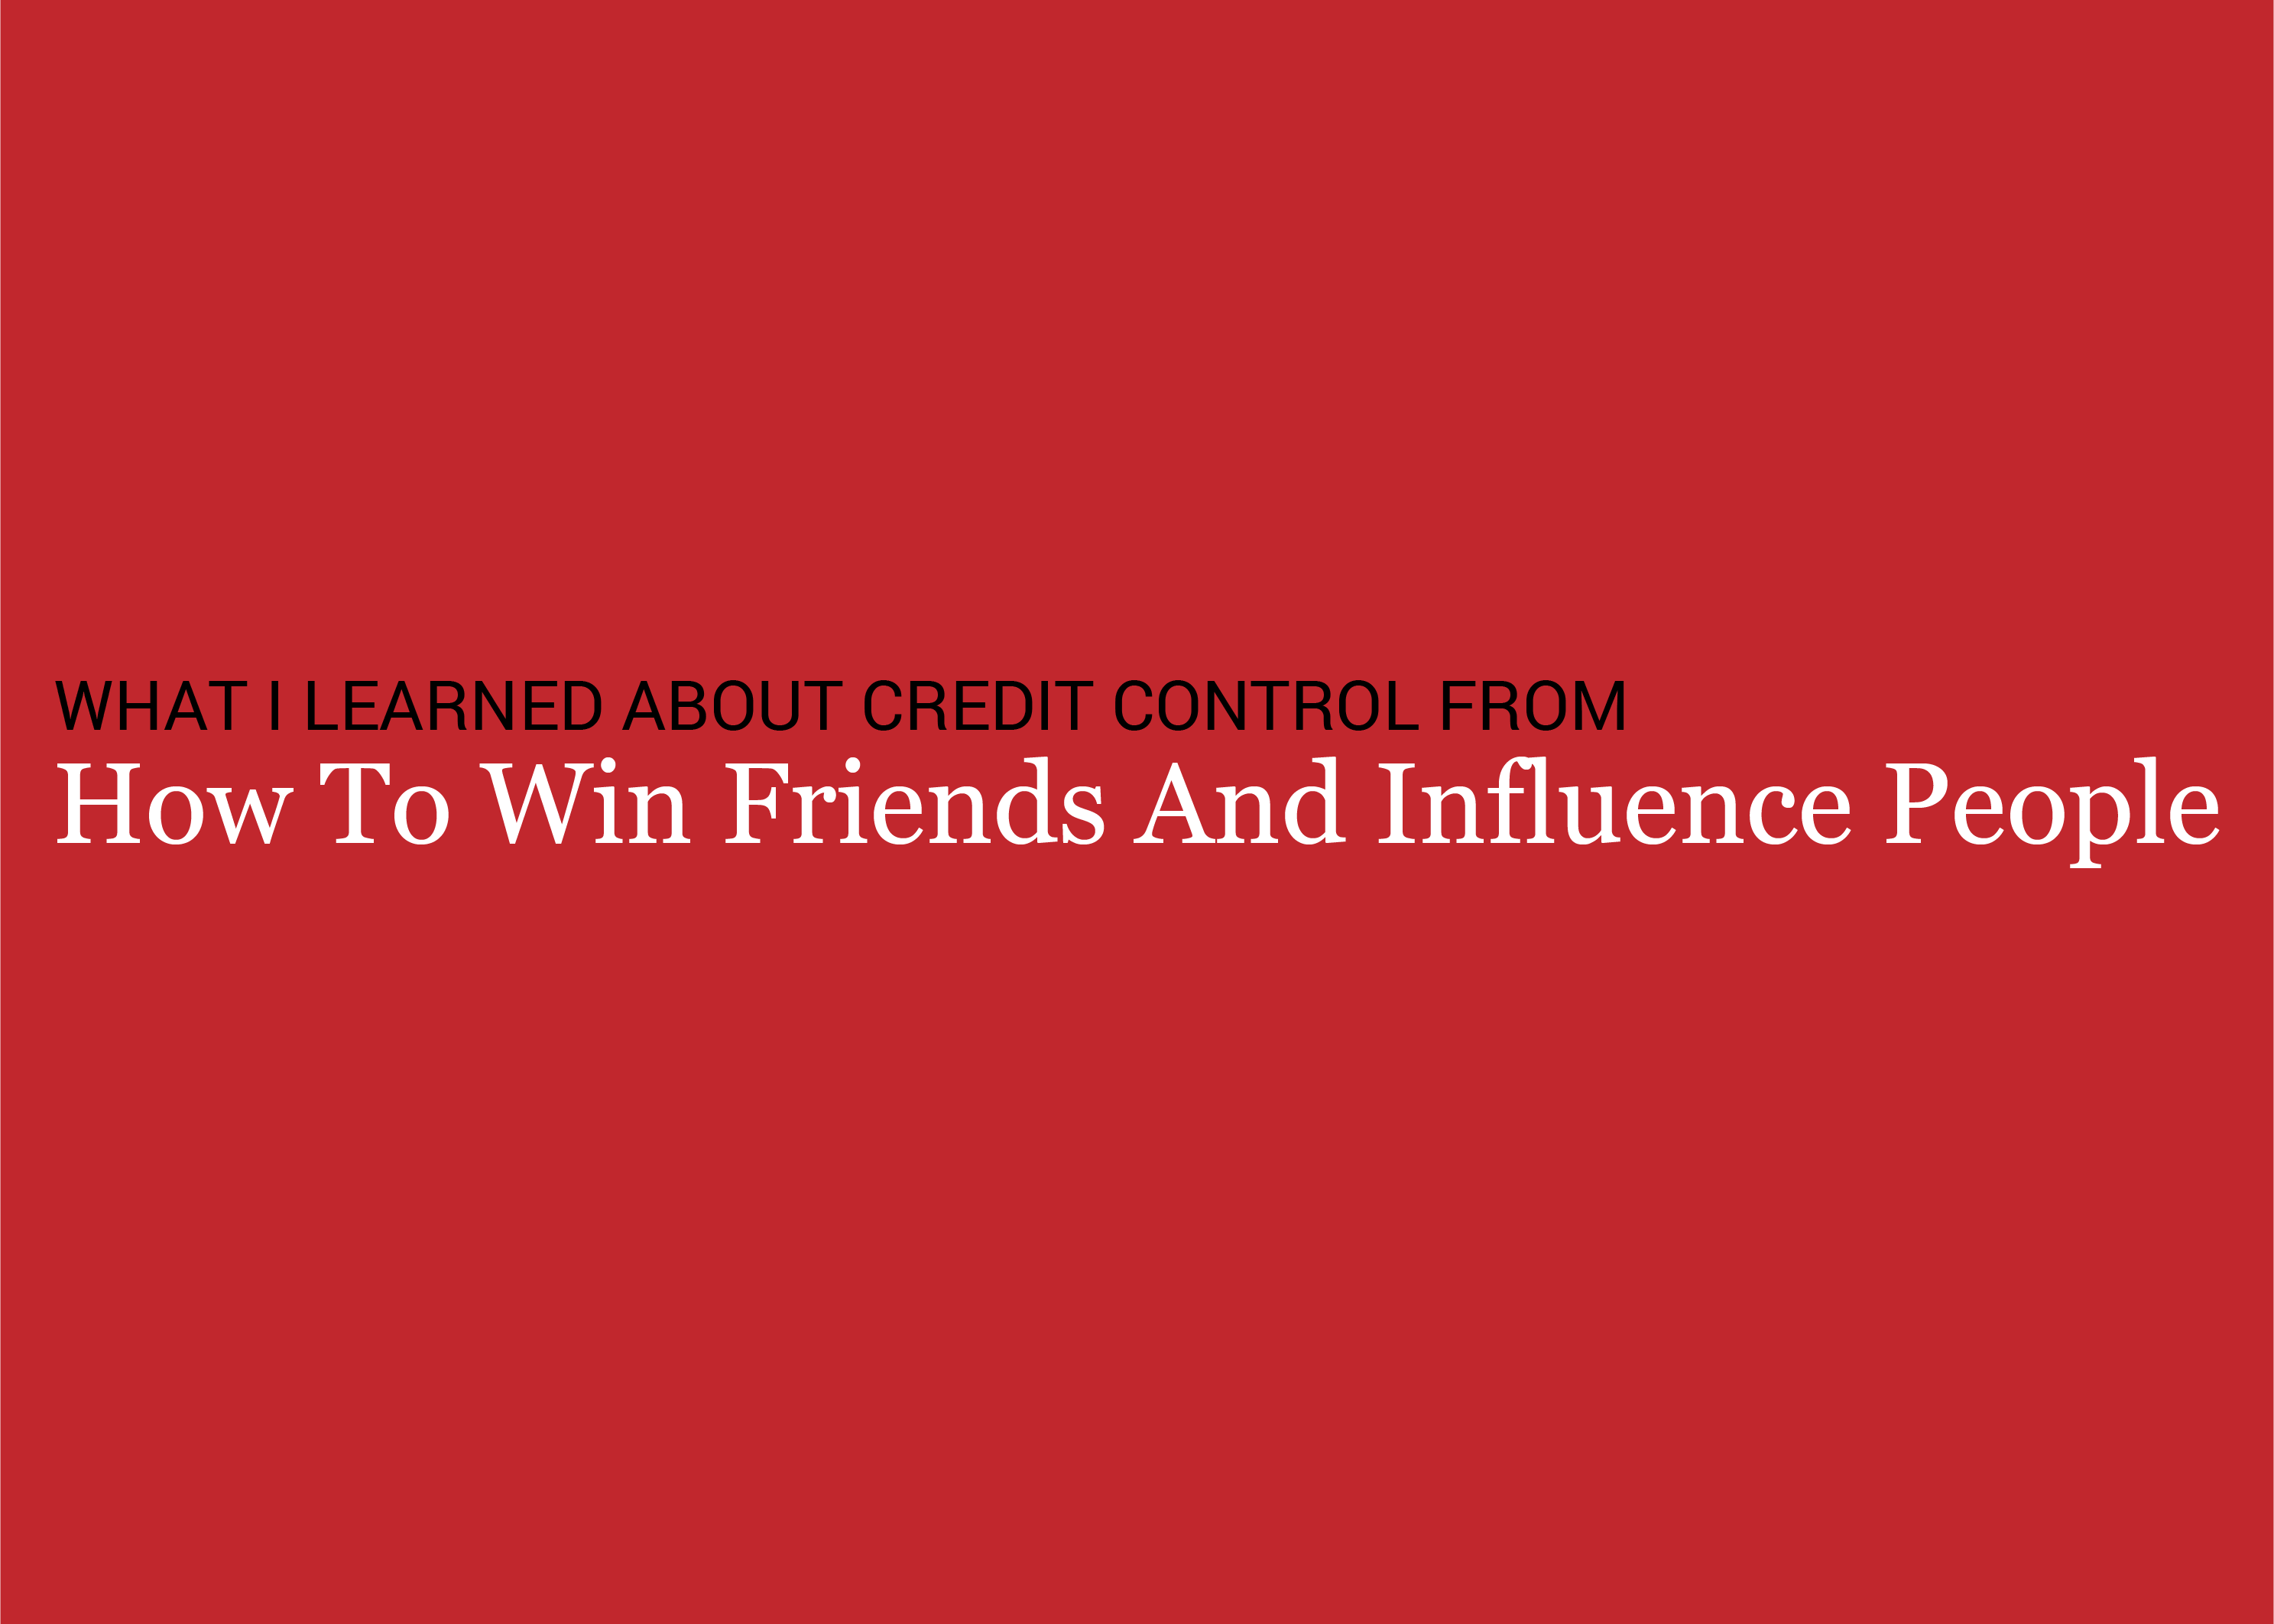 What I Learned About Credit Control From: How To Win Friends & Influence People (Part 1)